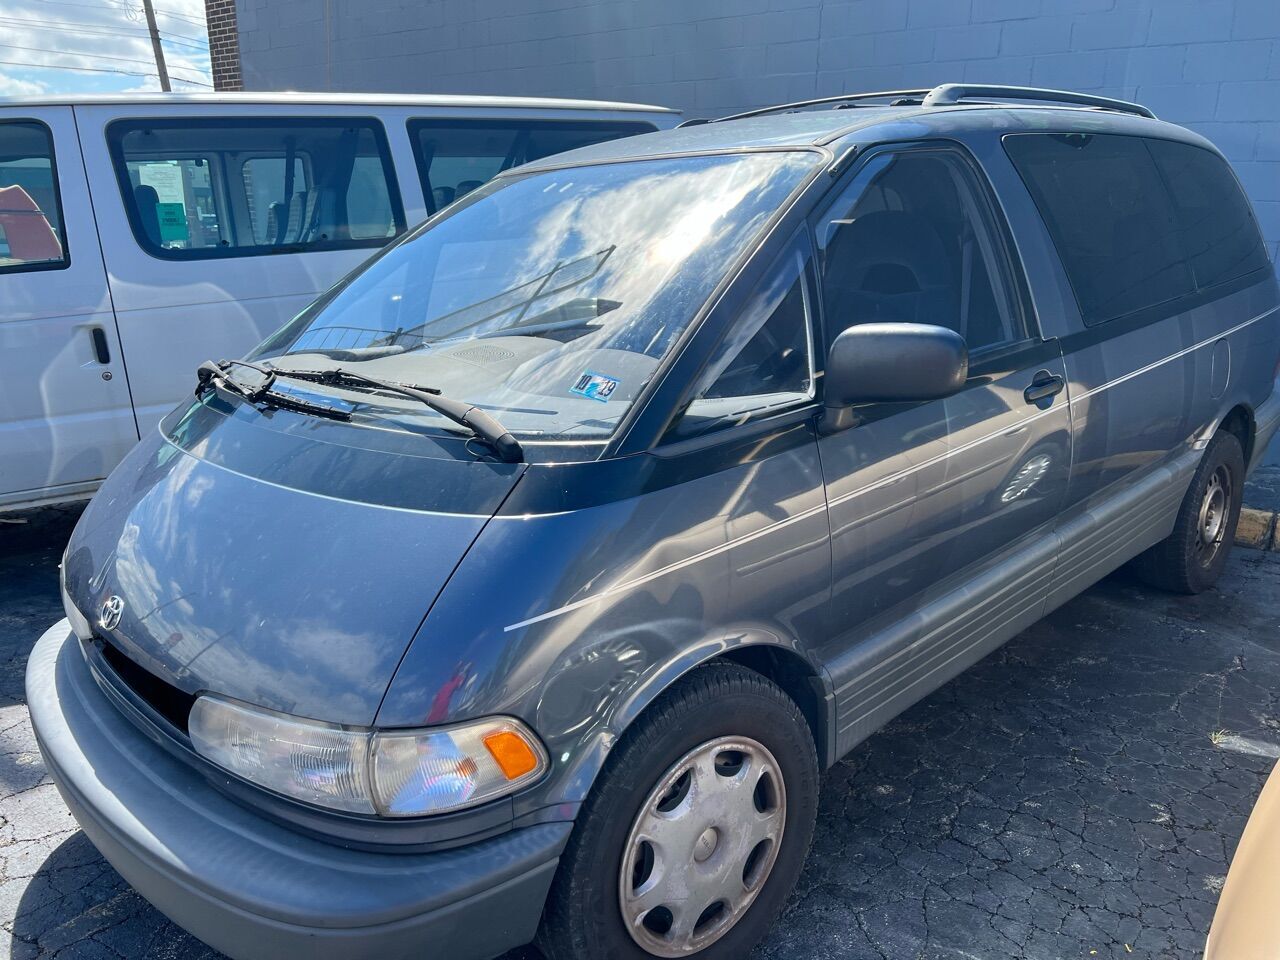 Toyota Previa For Sale In Masury Oh Carsforsale Com